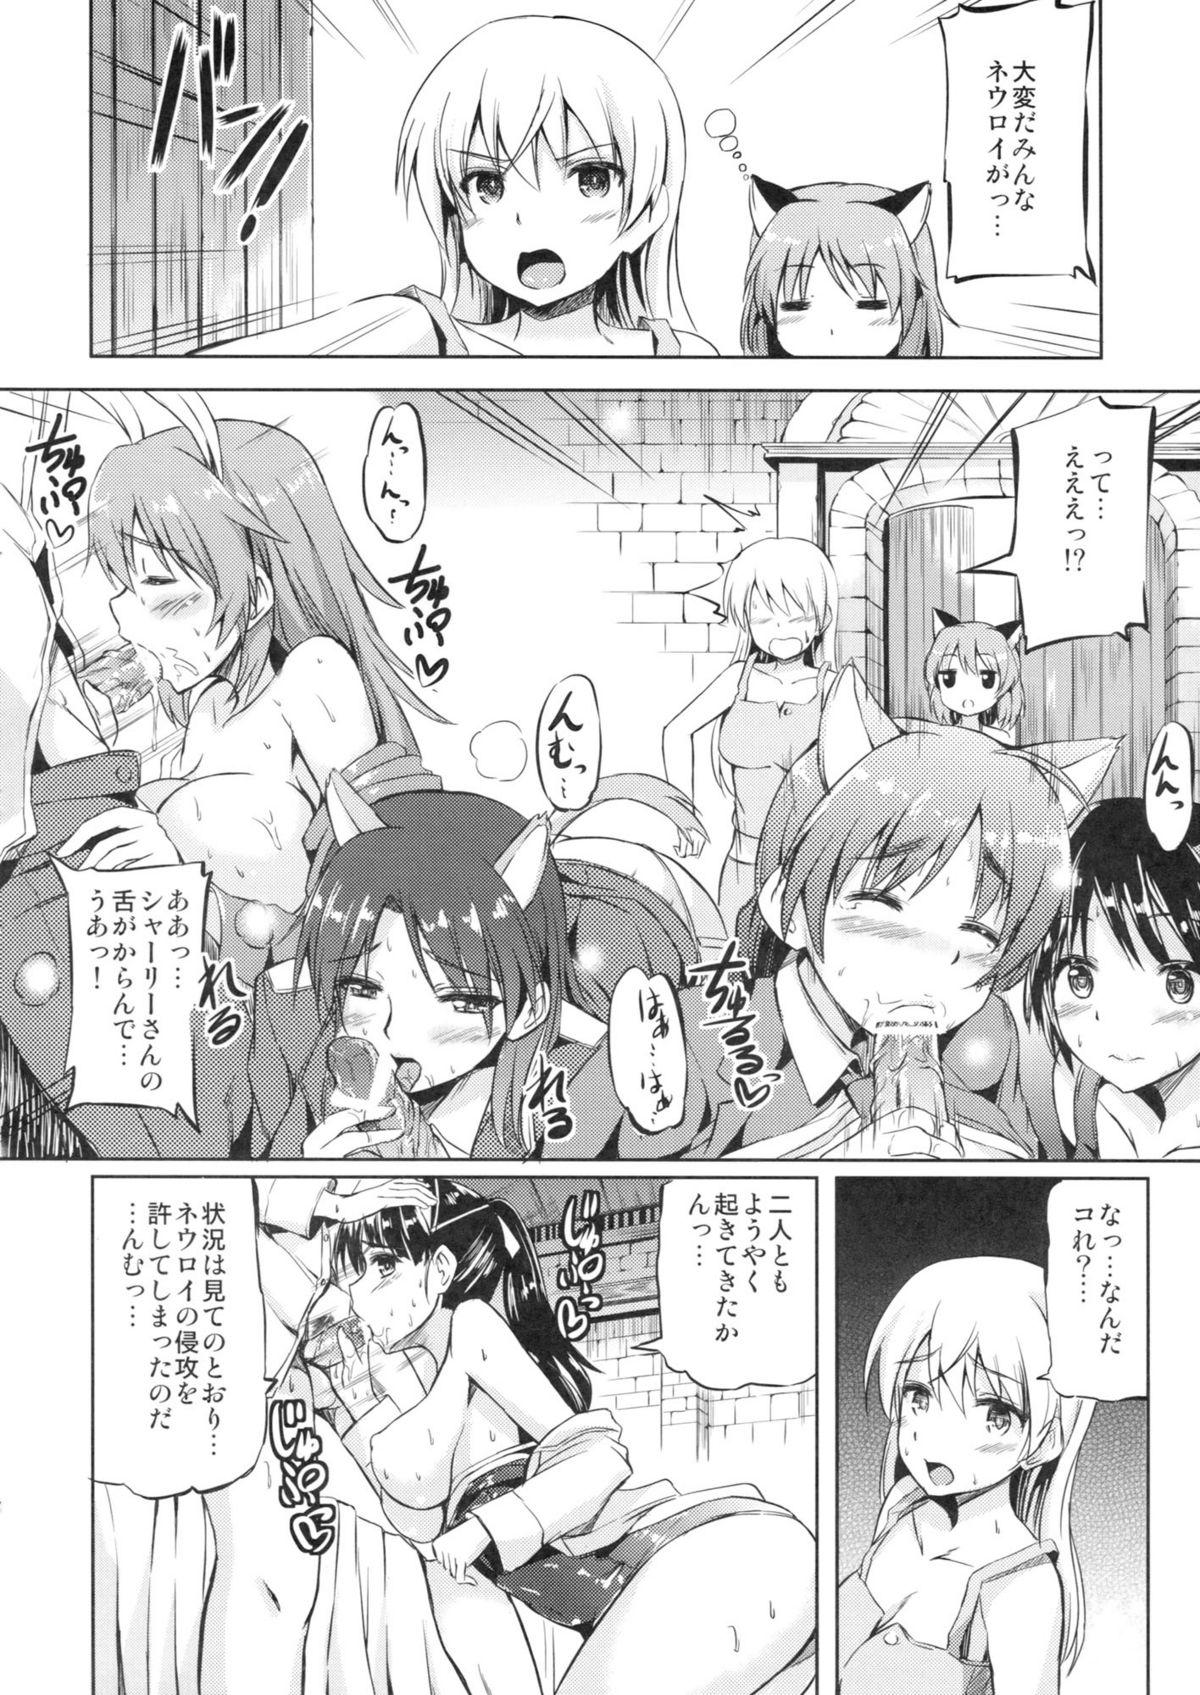 Old Man Delicious Witches! - Strike witches Best Blowjob Ever - Page 4